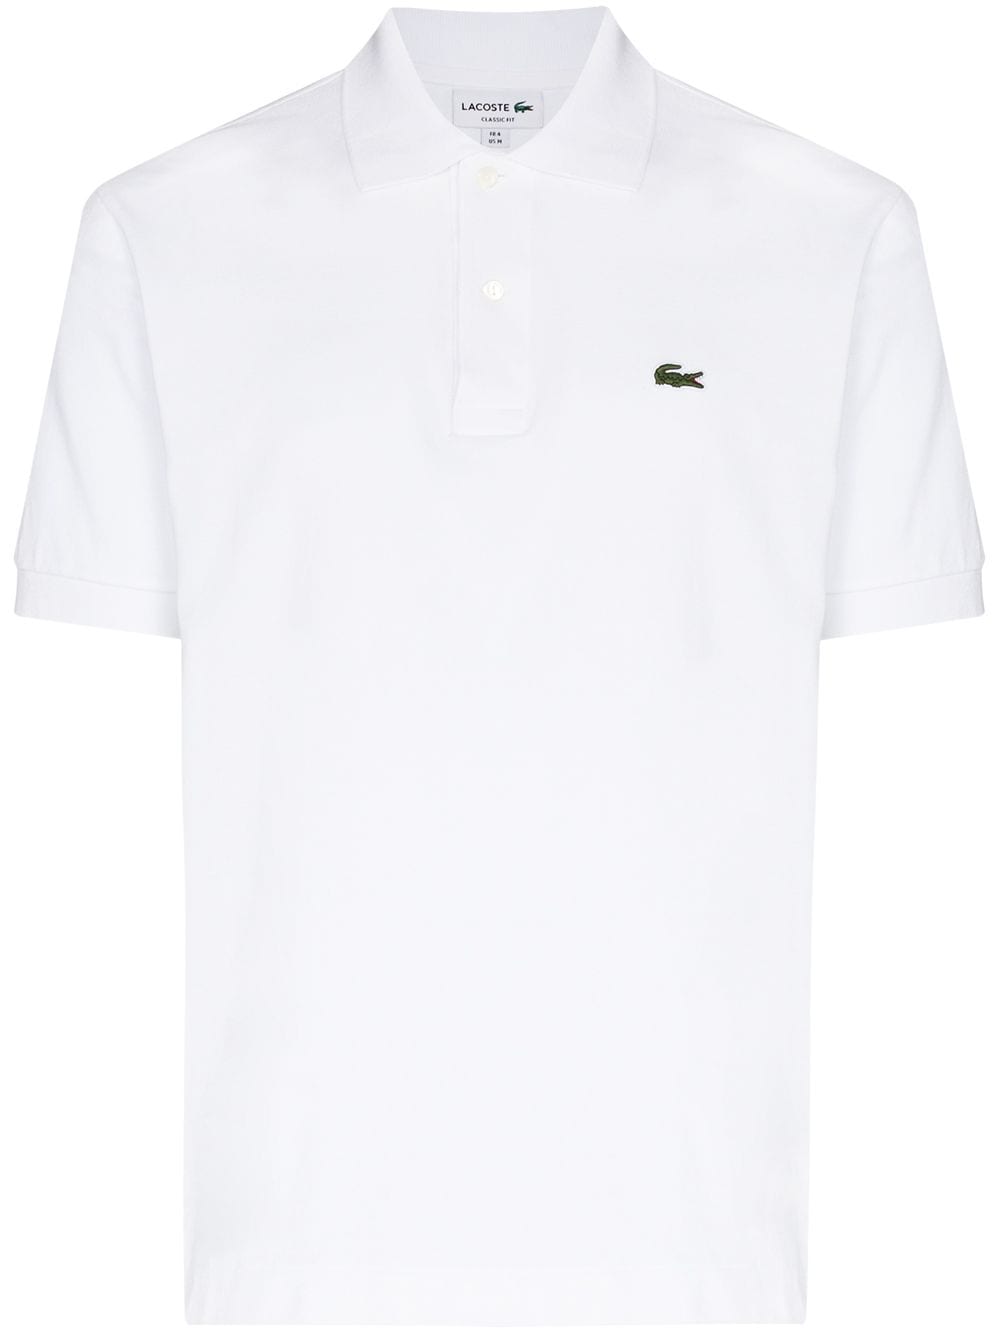 Lacoste logo-patch short-sleeve polo shirt - White von Lacoste